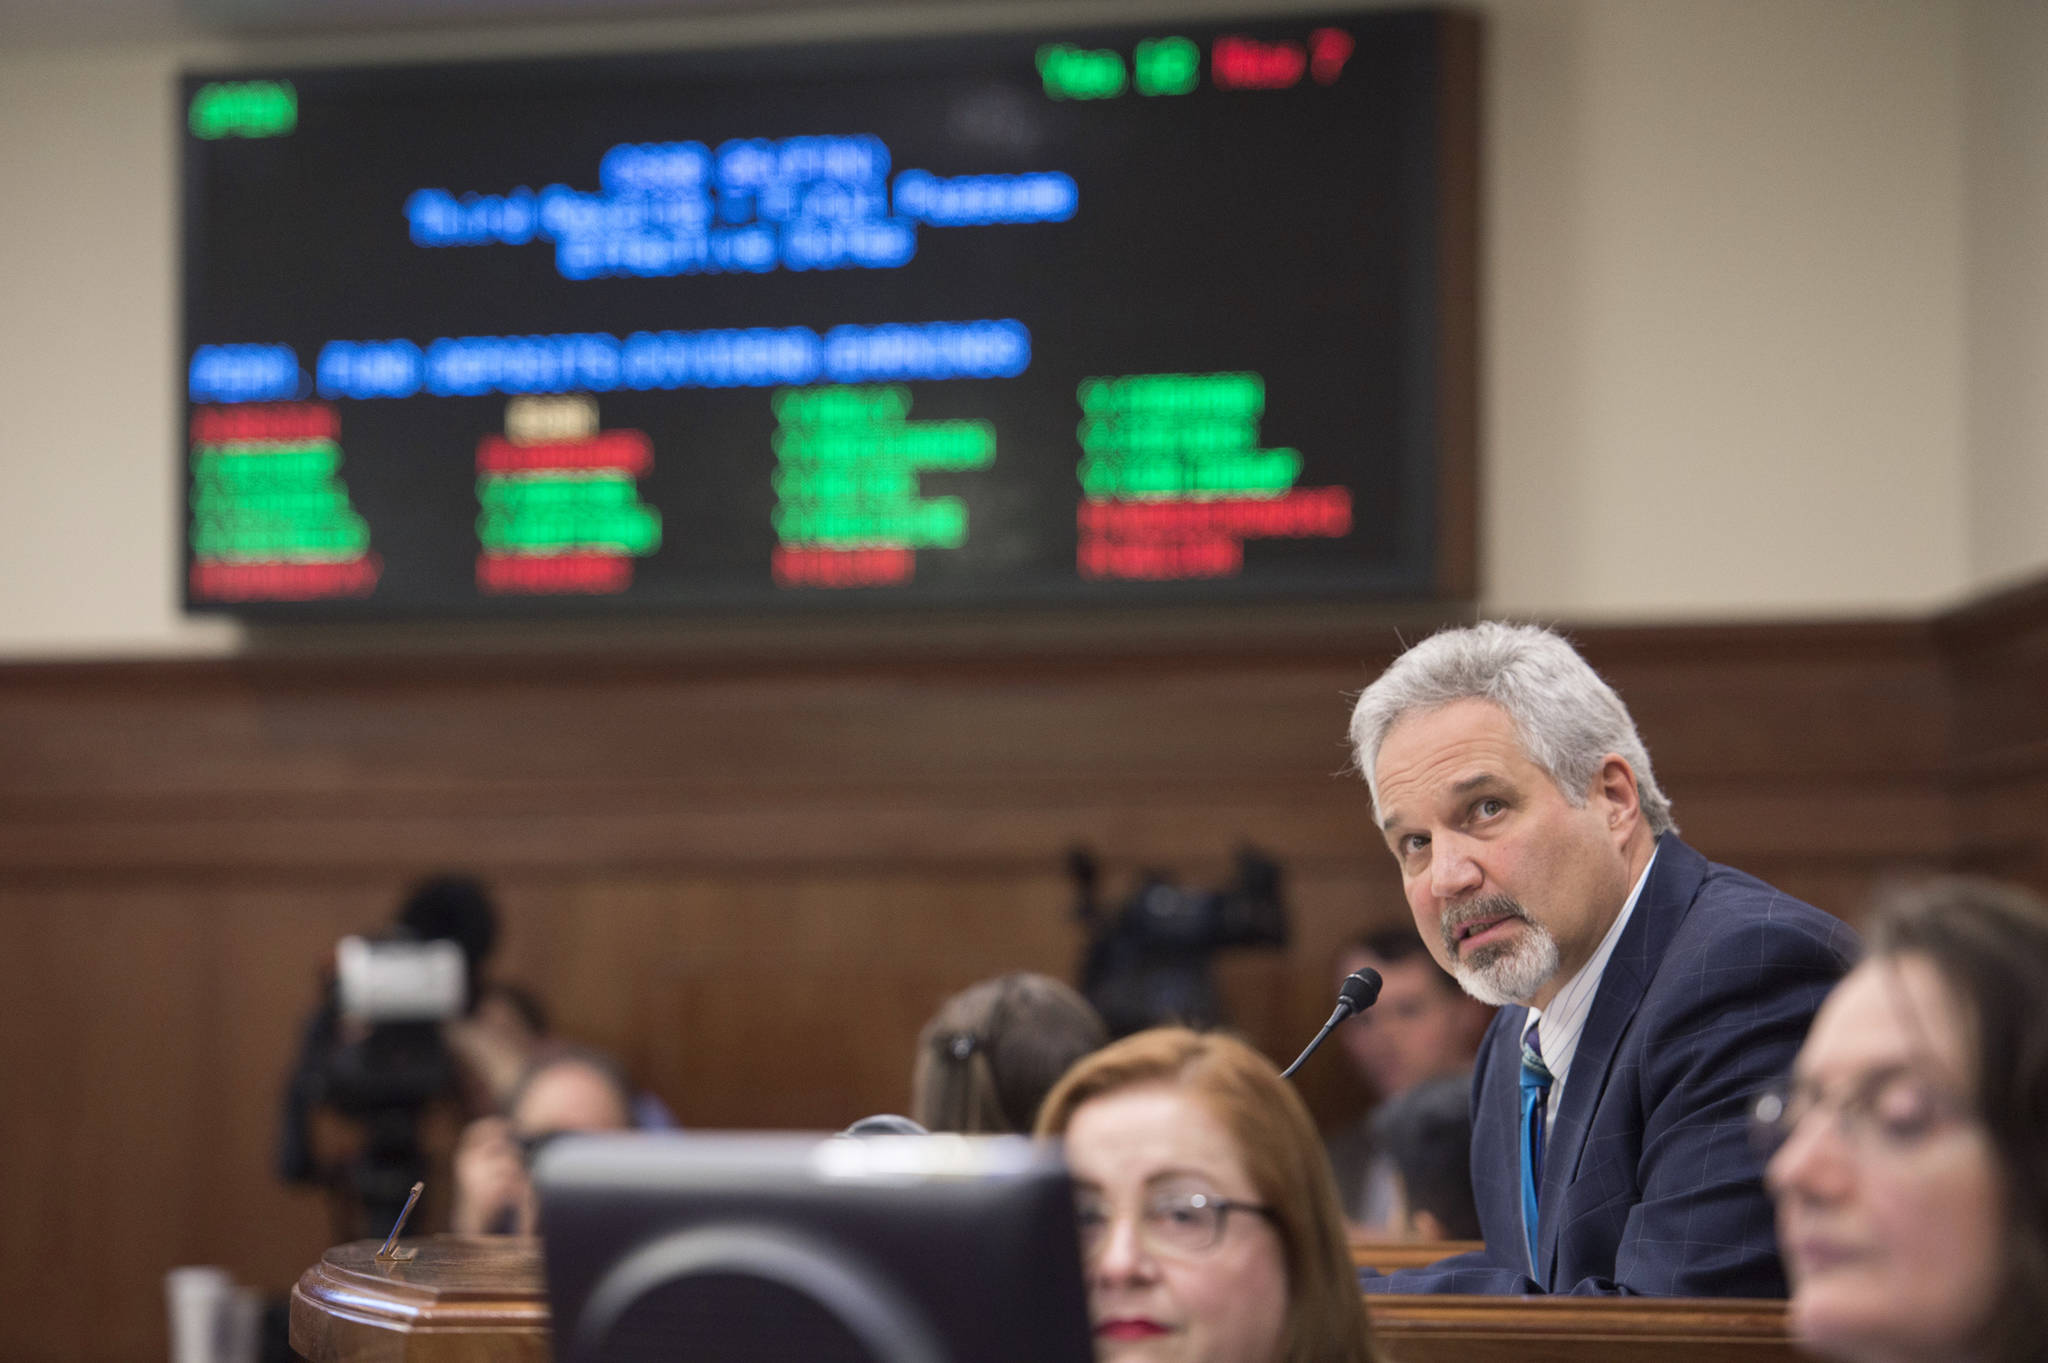 Senate President Pete Kelly watches the vote on SB 26 in the Senate chambers on Wednesday. The Senate voted to use a portion of earnings from the Alaska Permanent Fund to fund government and cap dividends at $1,000 per person. (Michael Penn | Juneau Empire)